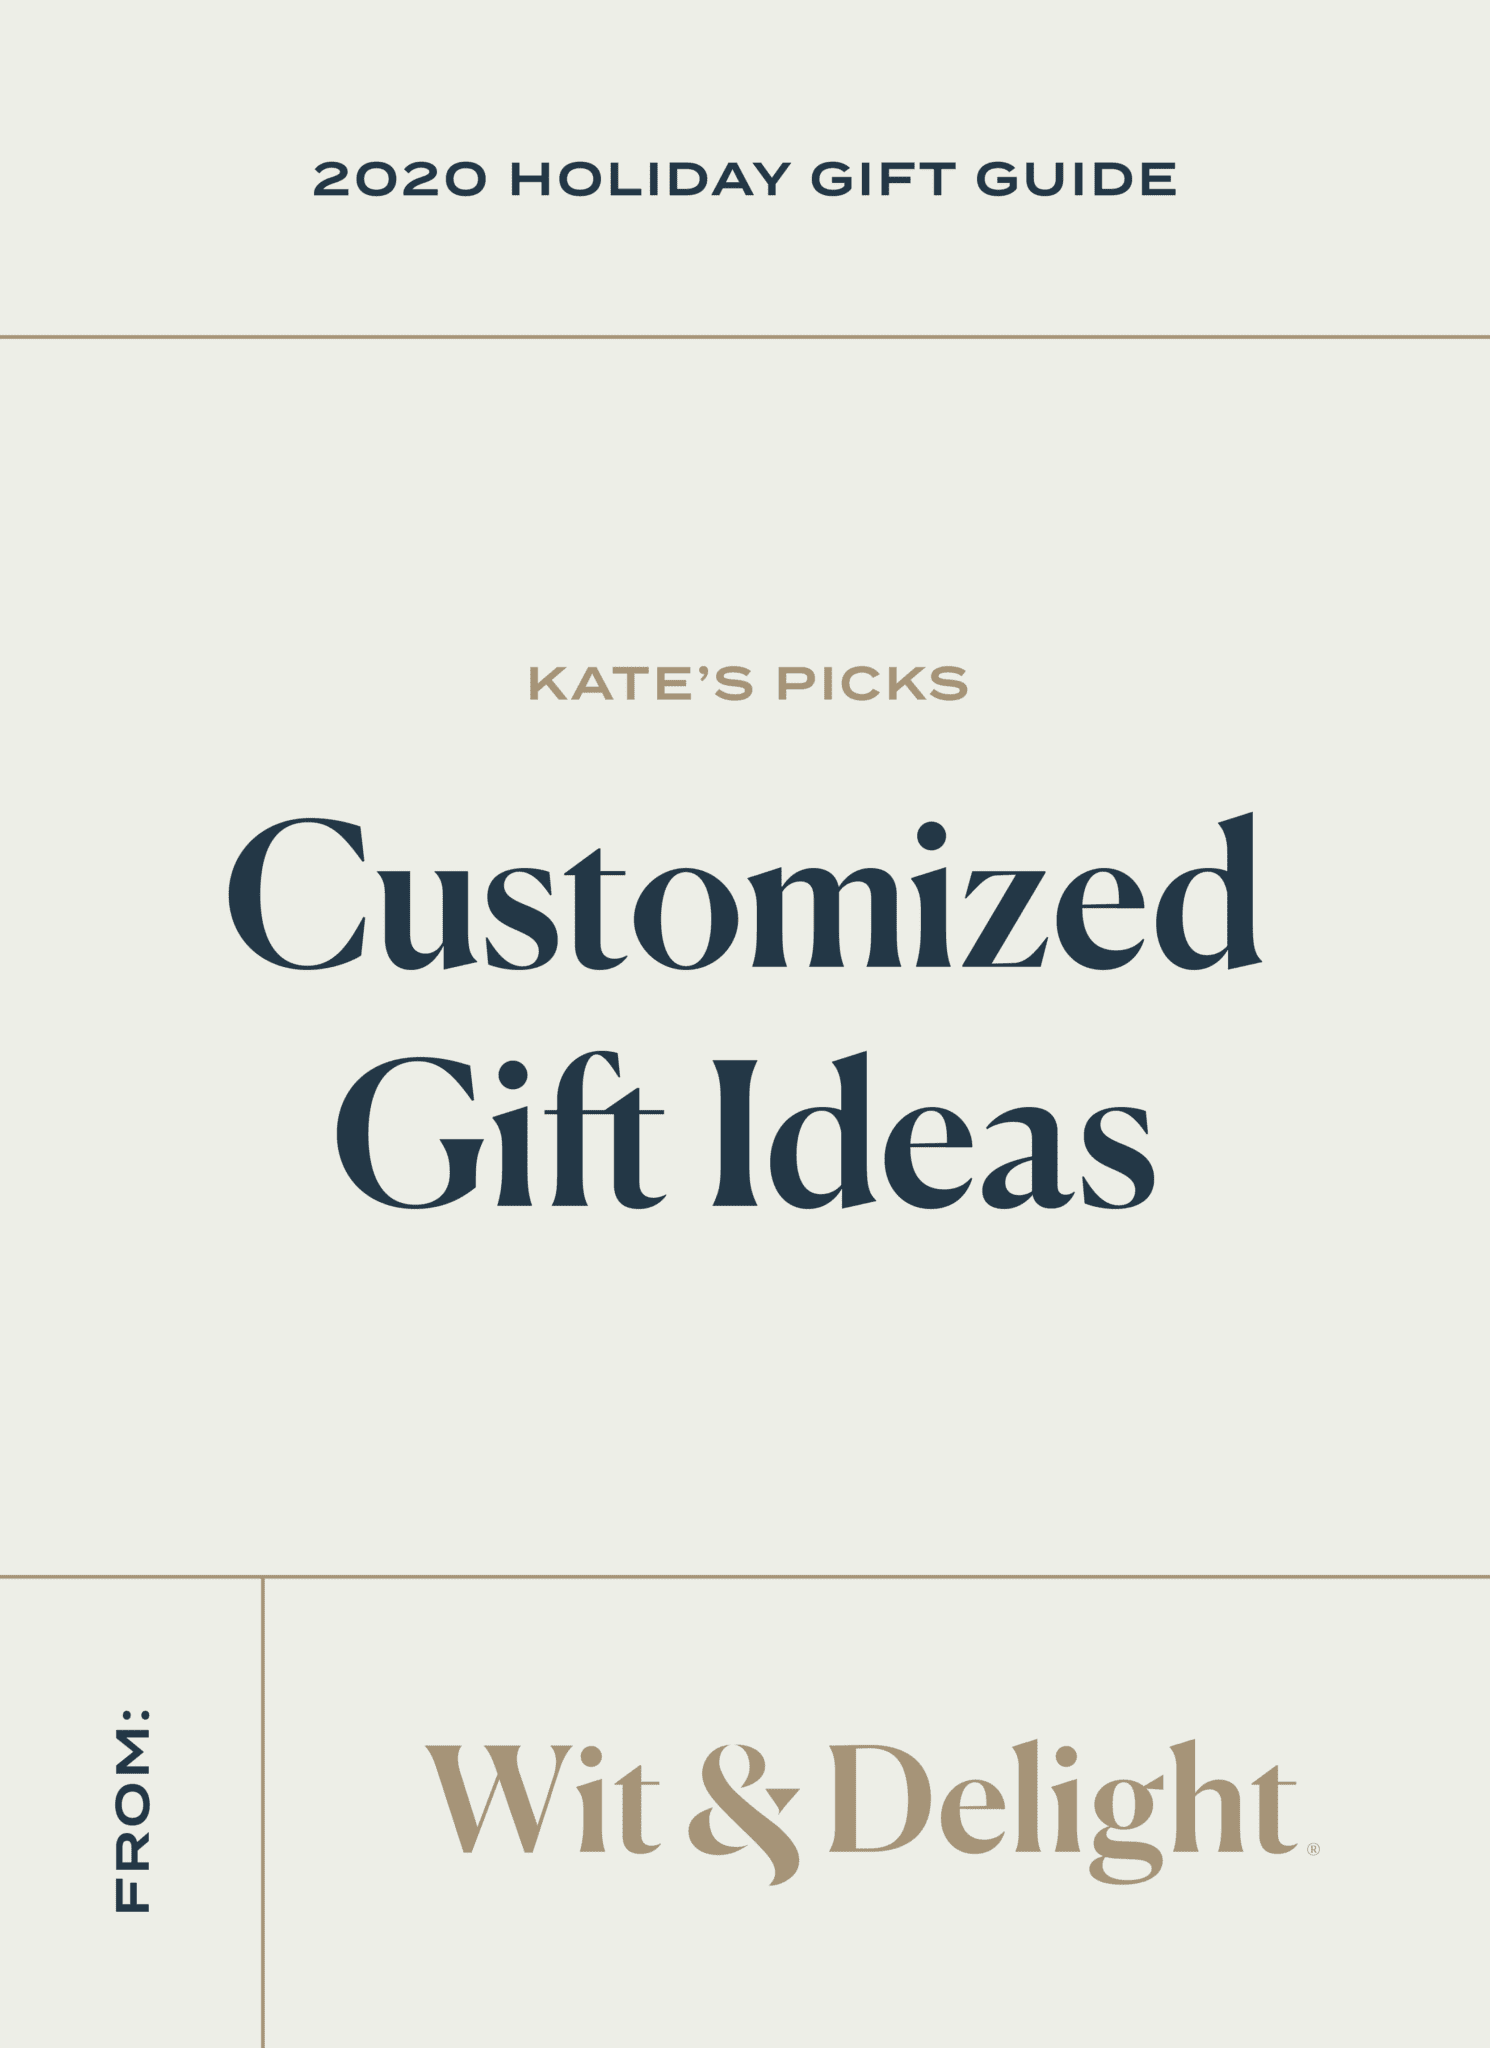 W&D 2020 Holiday Gift Guide: 11 Customized Gift Ideas | Wit & Delight